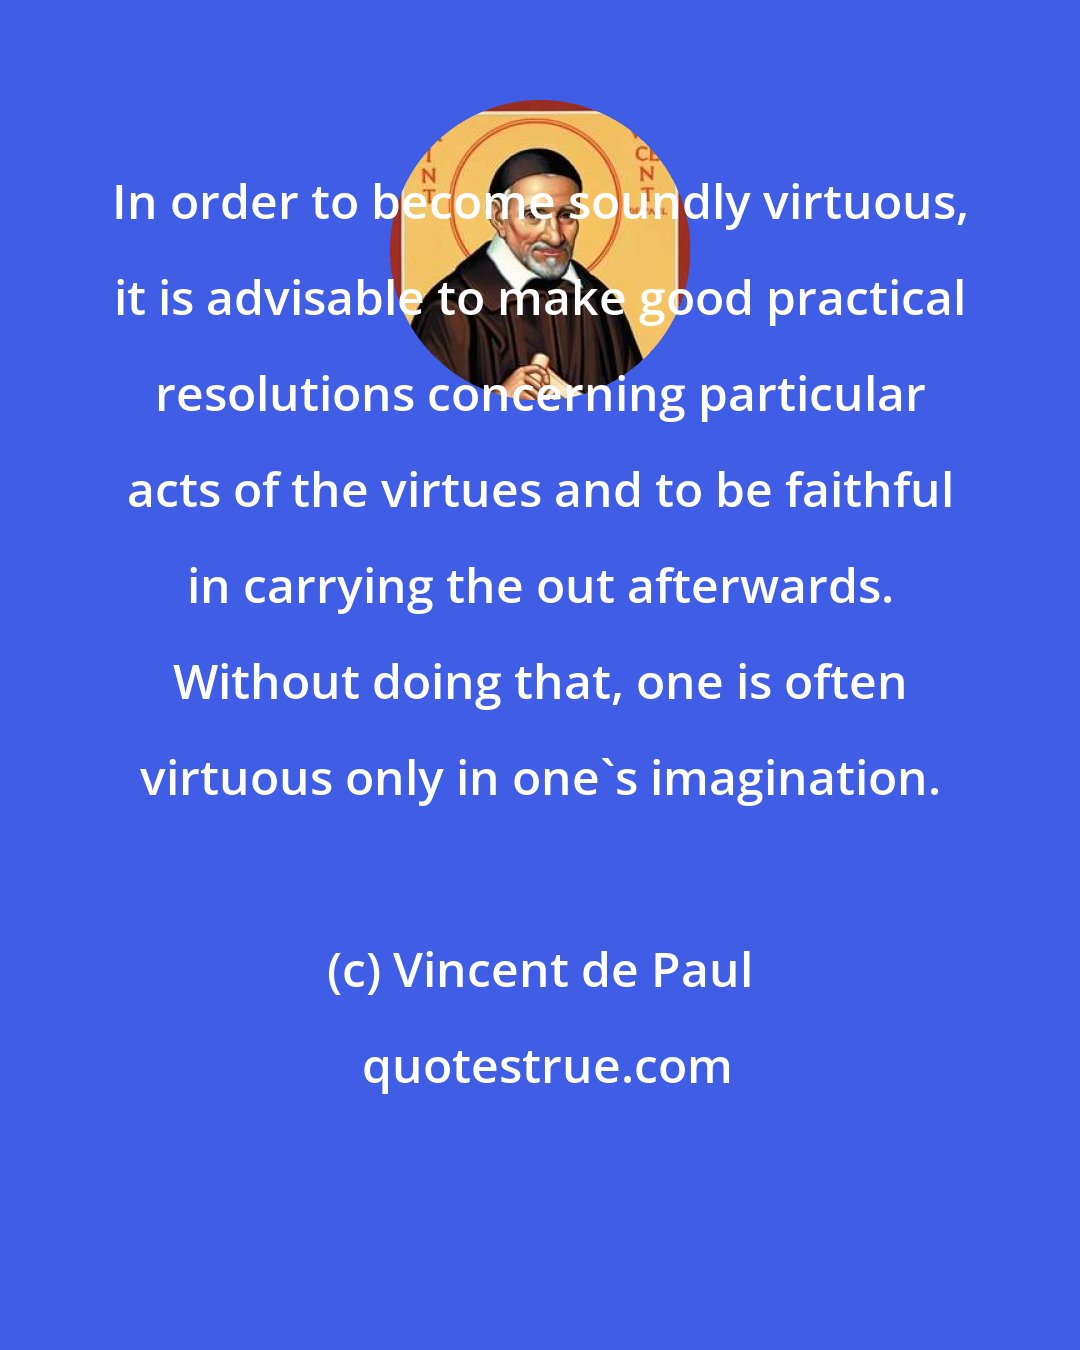 Vincent de Paul: In order to become soundly virtuous, it is advisable to make good practical resolutions concerning particular acts of the virtues and to be faithful in carrying the out afterwards. Without doing that, one is often virtuous only in one's imagination.